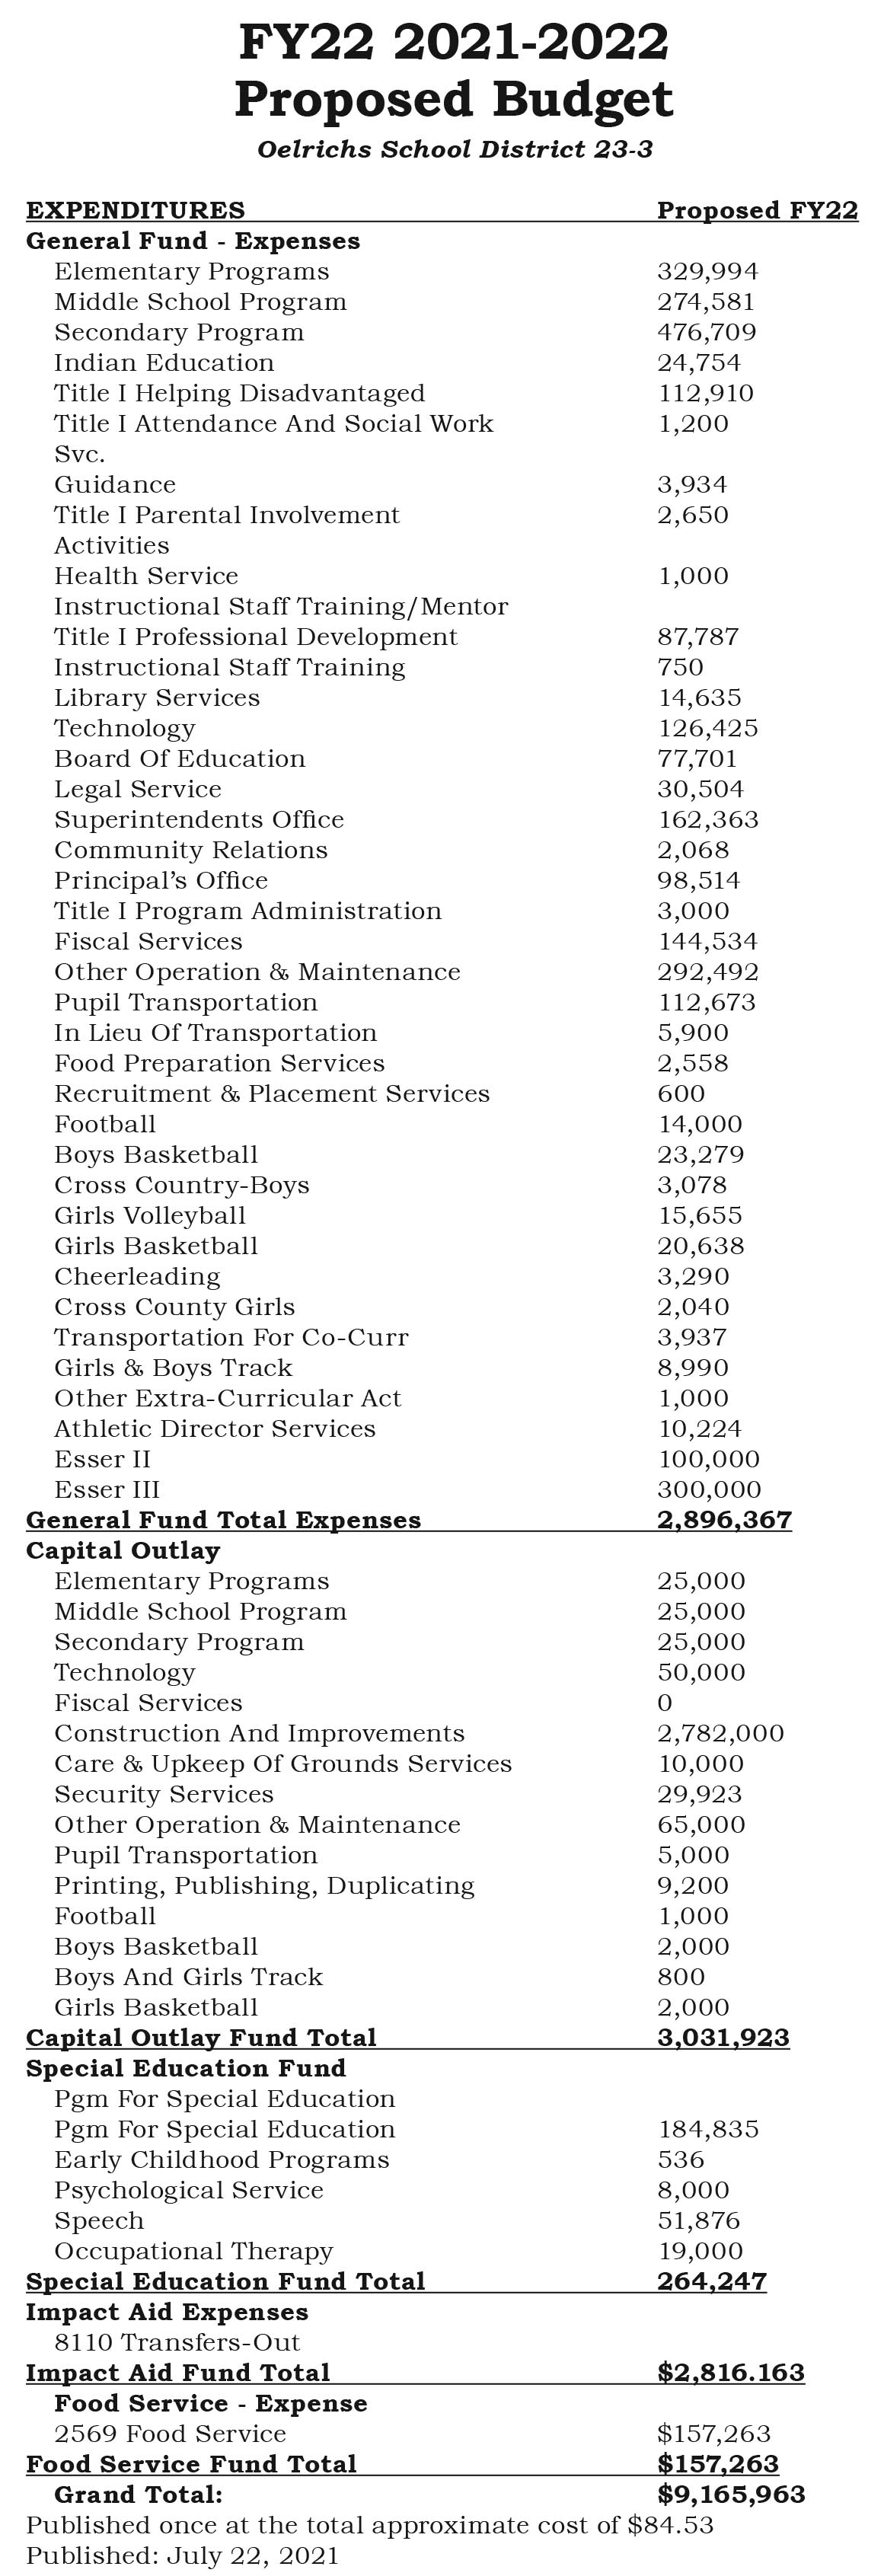 Oelrichs School District FY22 2021 22 Proposed Budget Expenditures